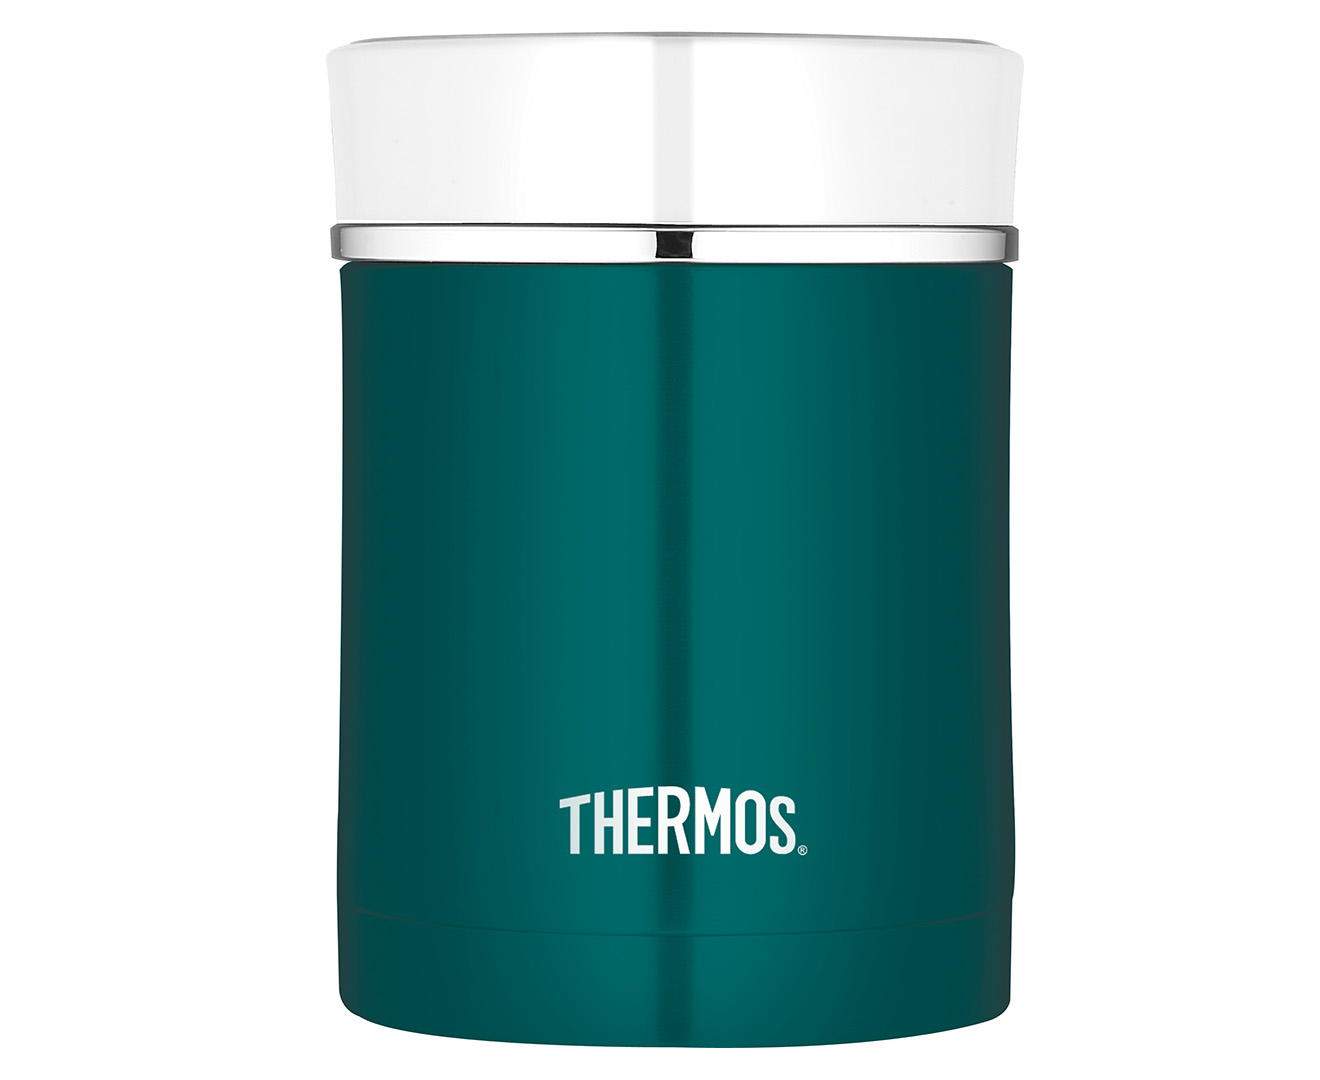 Thermos Sipp 470mL Stainless Steel Vacuum Insulated Food Jar - Teal